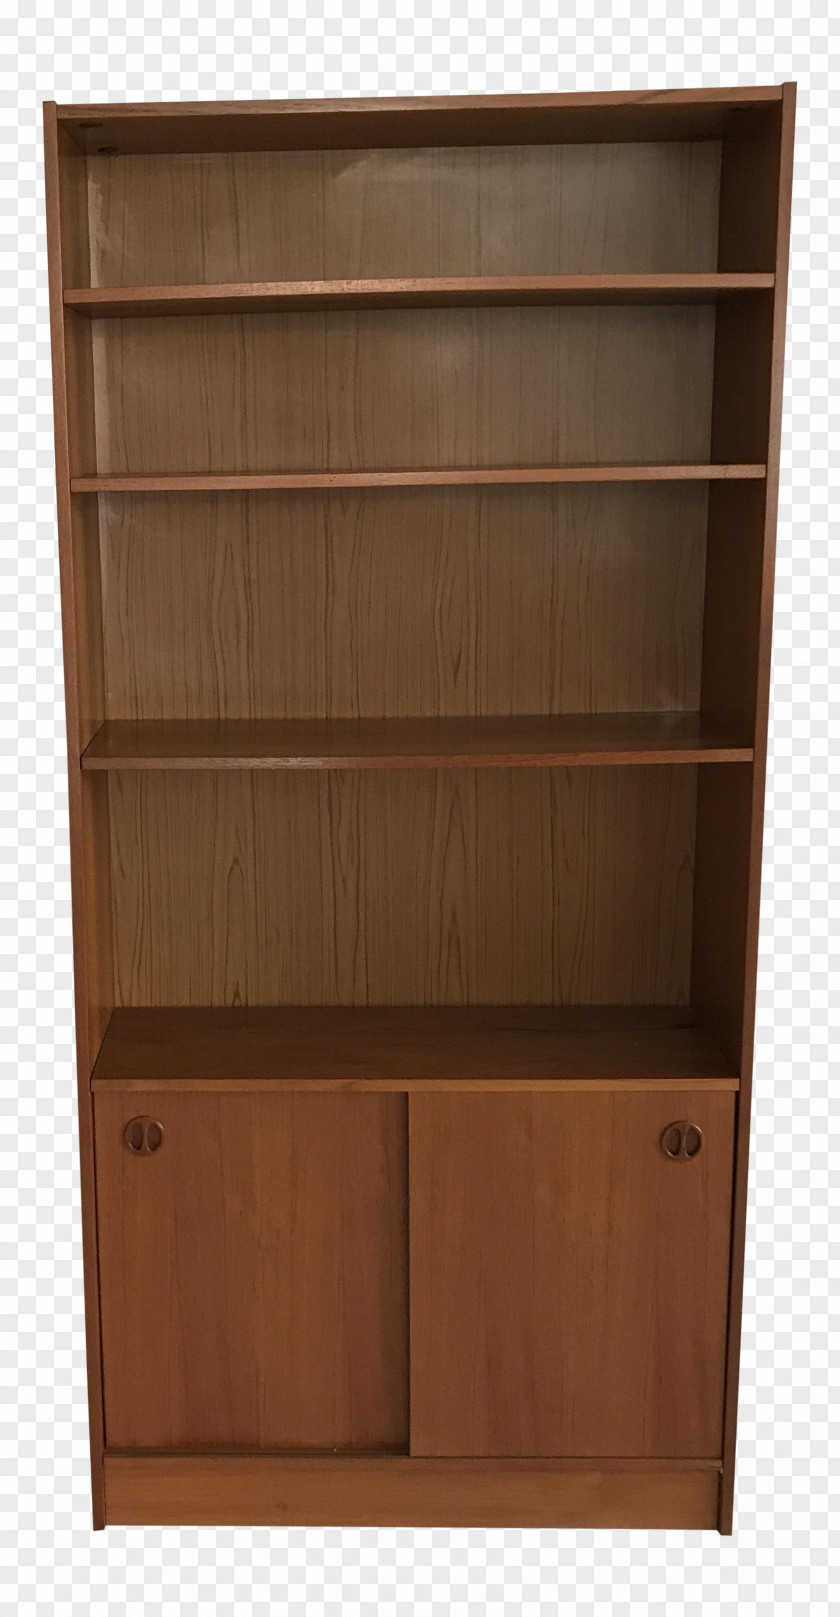 The Shelf Bookcase Drawer Cabinetry Door PNG